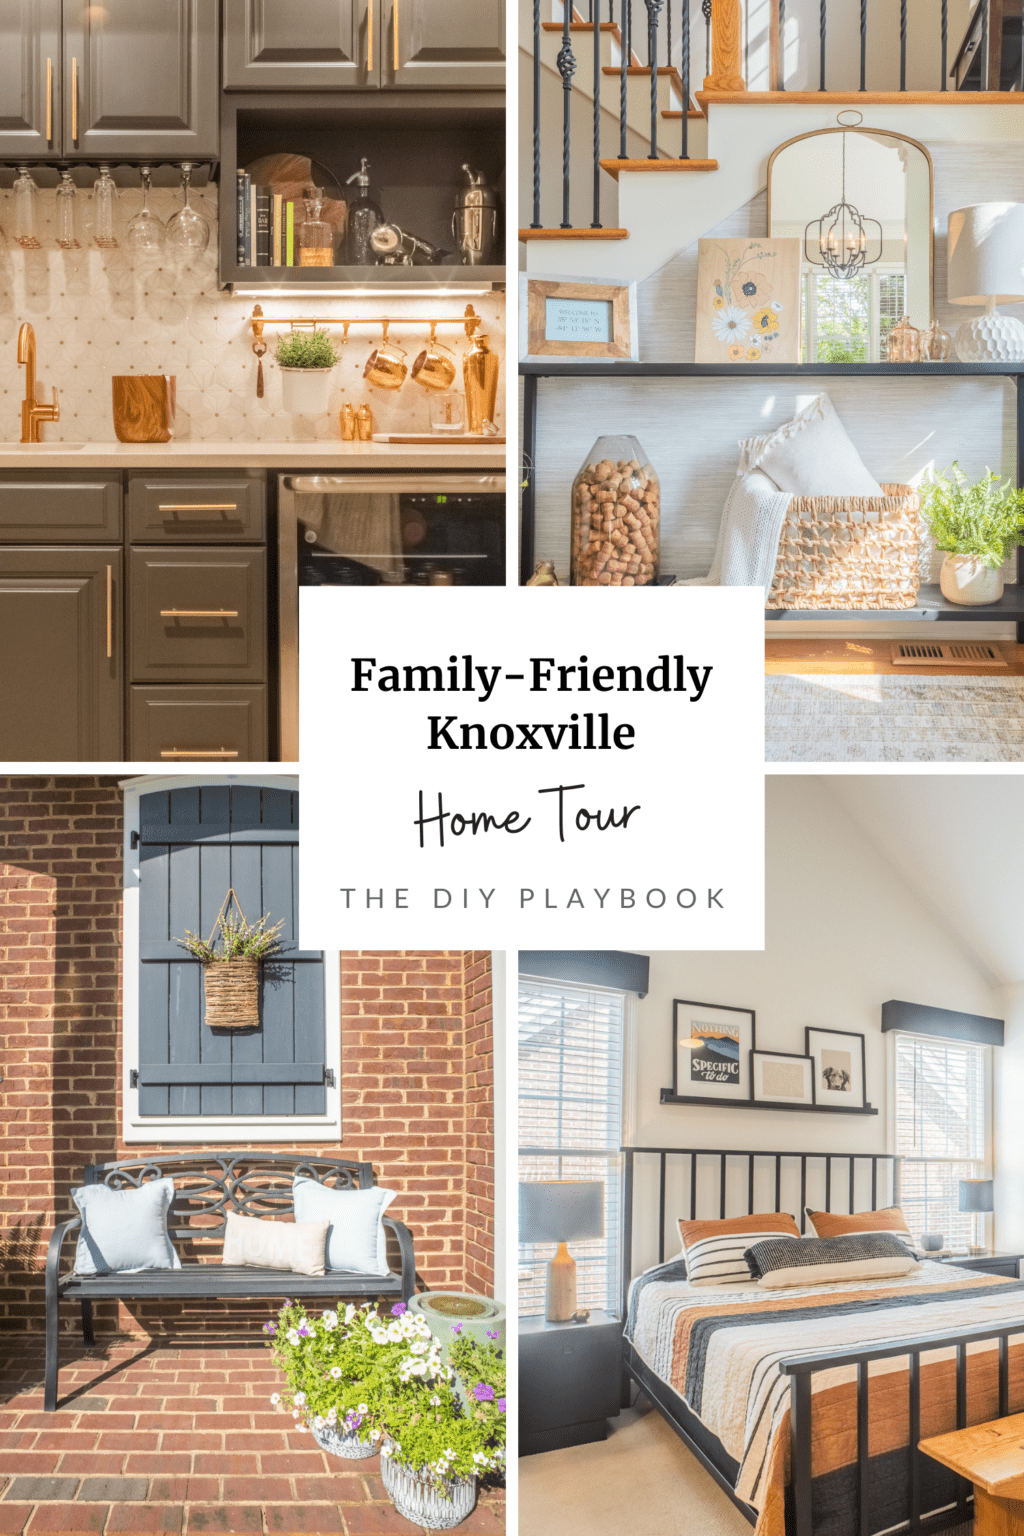 A family-friendly knoxville home tour